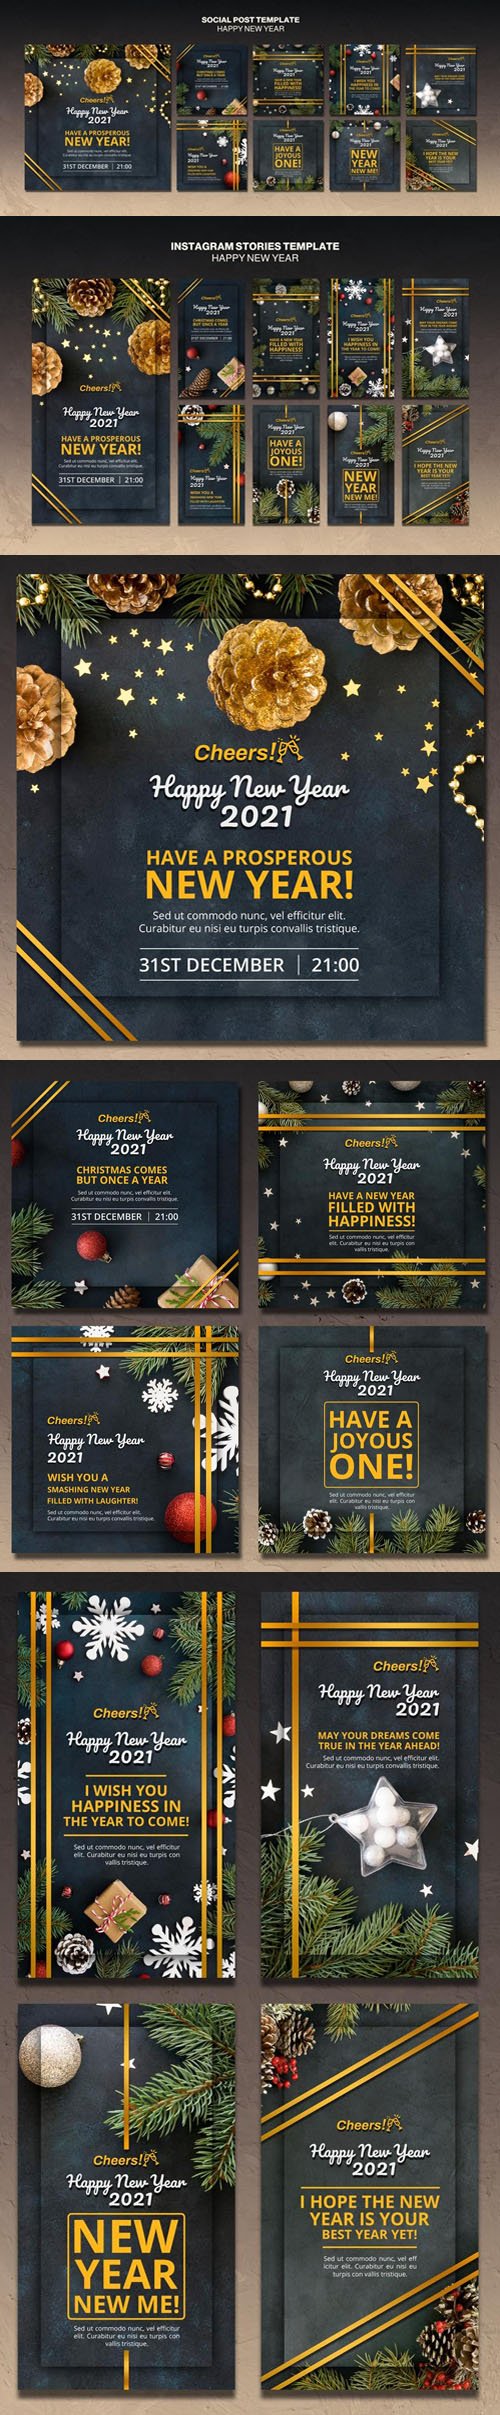 Happy New Year 2021 Social Media Posts & Instagram Stories PSD Templates